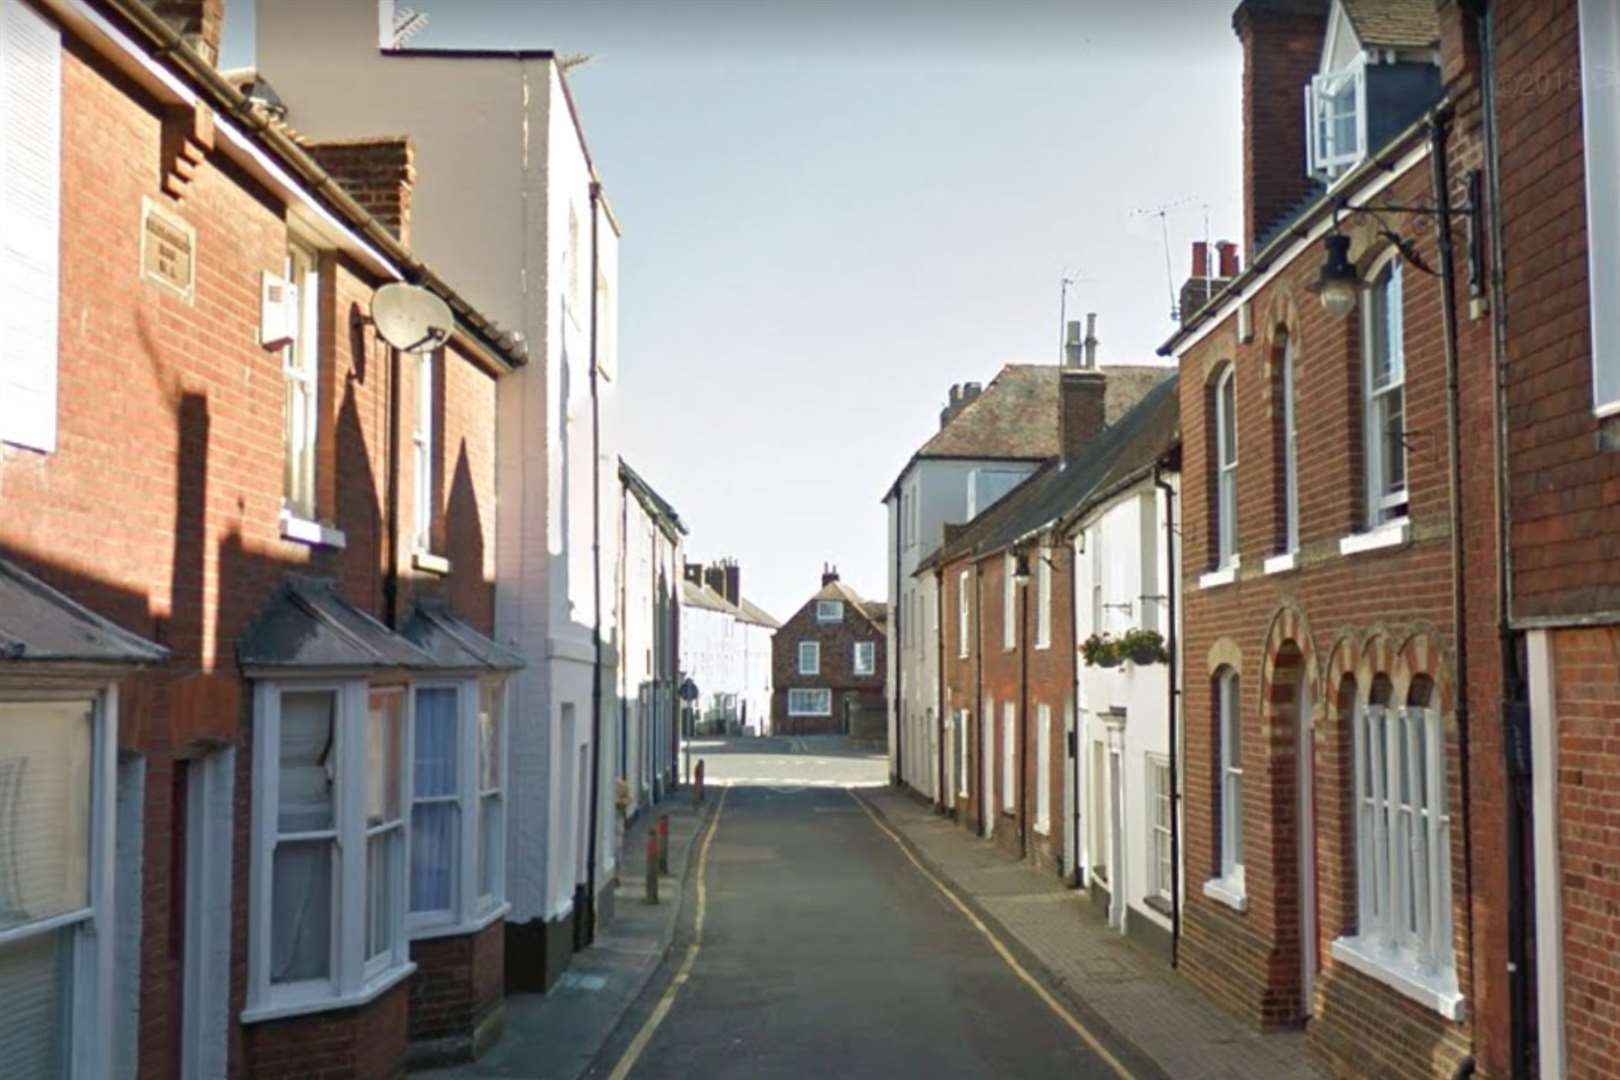 A man has hid wallet stolen in Love Lane, Canterbury. Picture: Google Maps